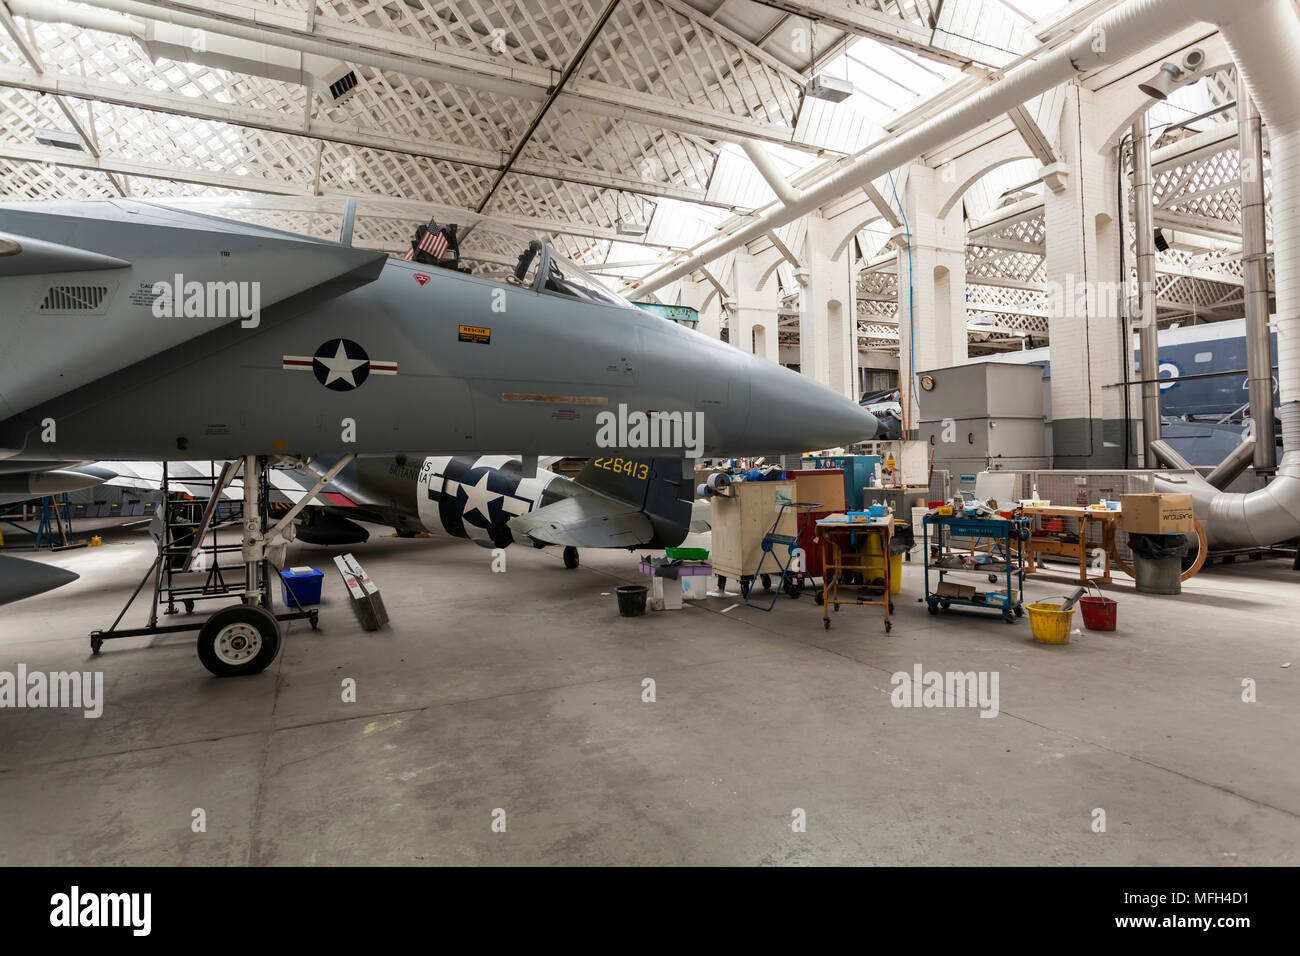 Duxford Air Museum. England, UK.  Several aircraft in the museum hanger's workshop for mainenance. Stock Photo